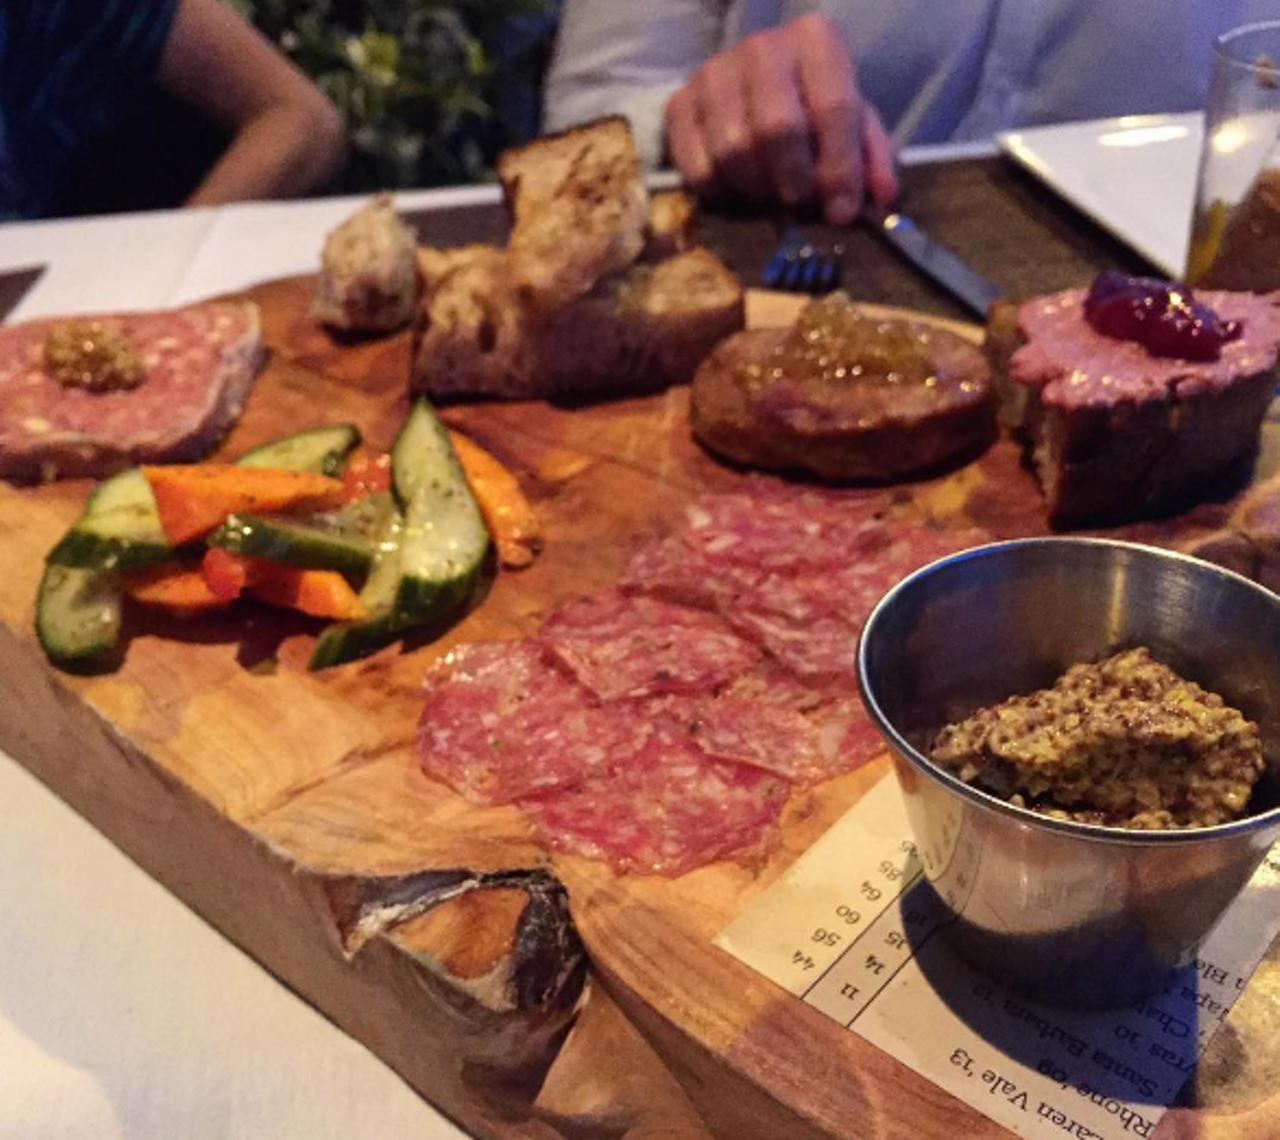 Charcuterie platter from The Ravenous Pig
1234 N. Orange Ave., 407-628-2333
Housemade cured meats, terrines, rillettes, pickles, jams and crackers on a wooden board. Selections rotate with the kitchen&#146;s whim, but it&#146;s always perfect for sharing.
Photo via slade5/Instagram